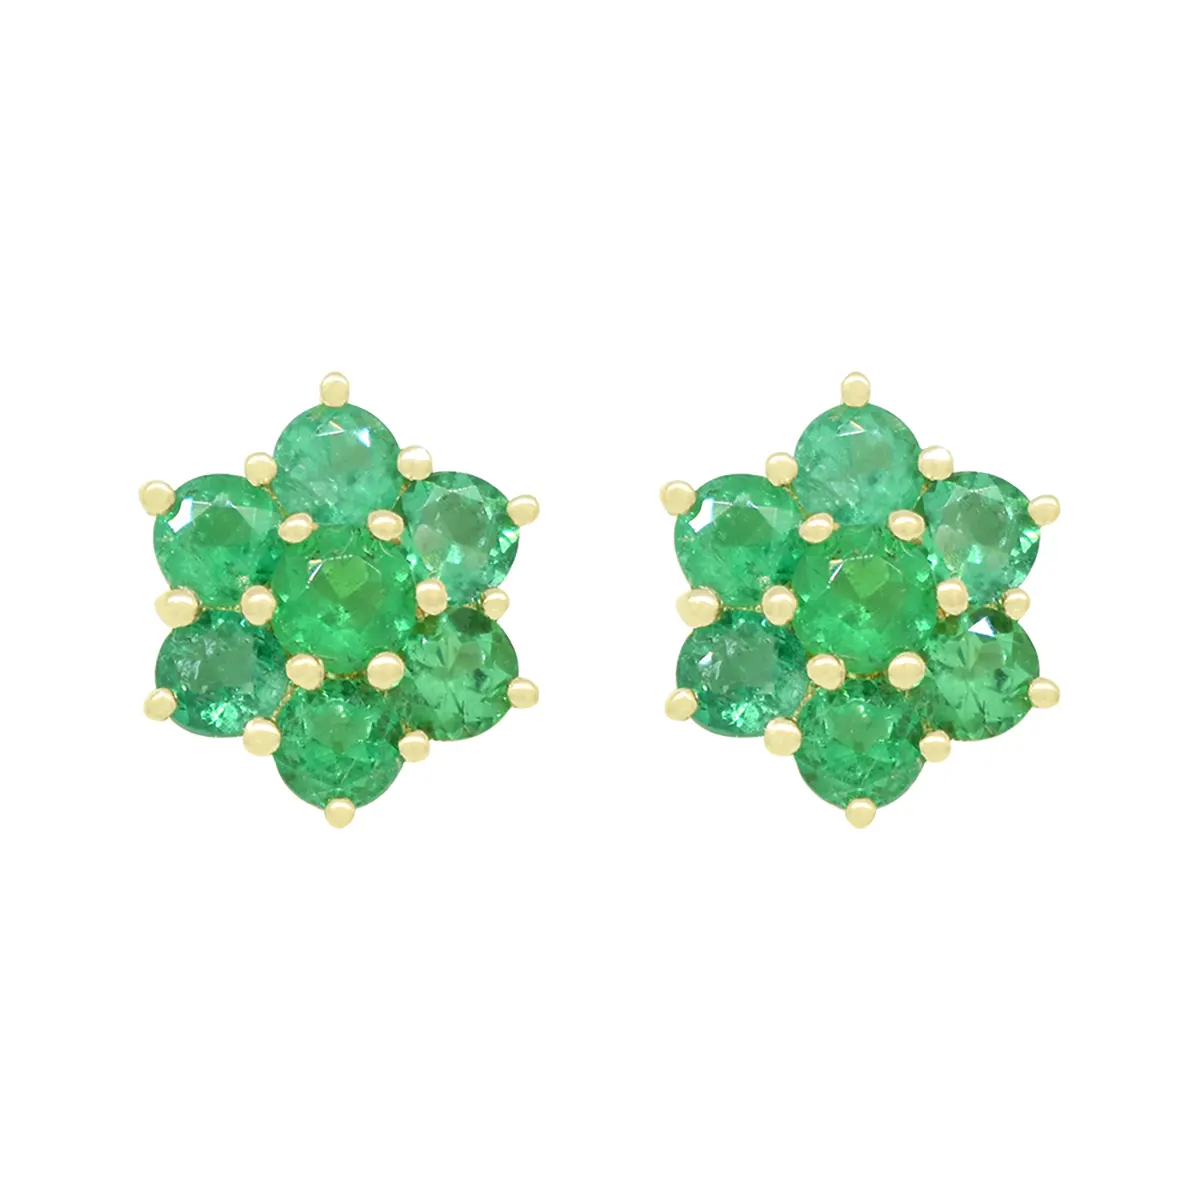 emerald-earrings-in-18k-yellow-gold-cluster-style